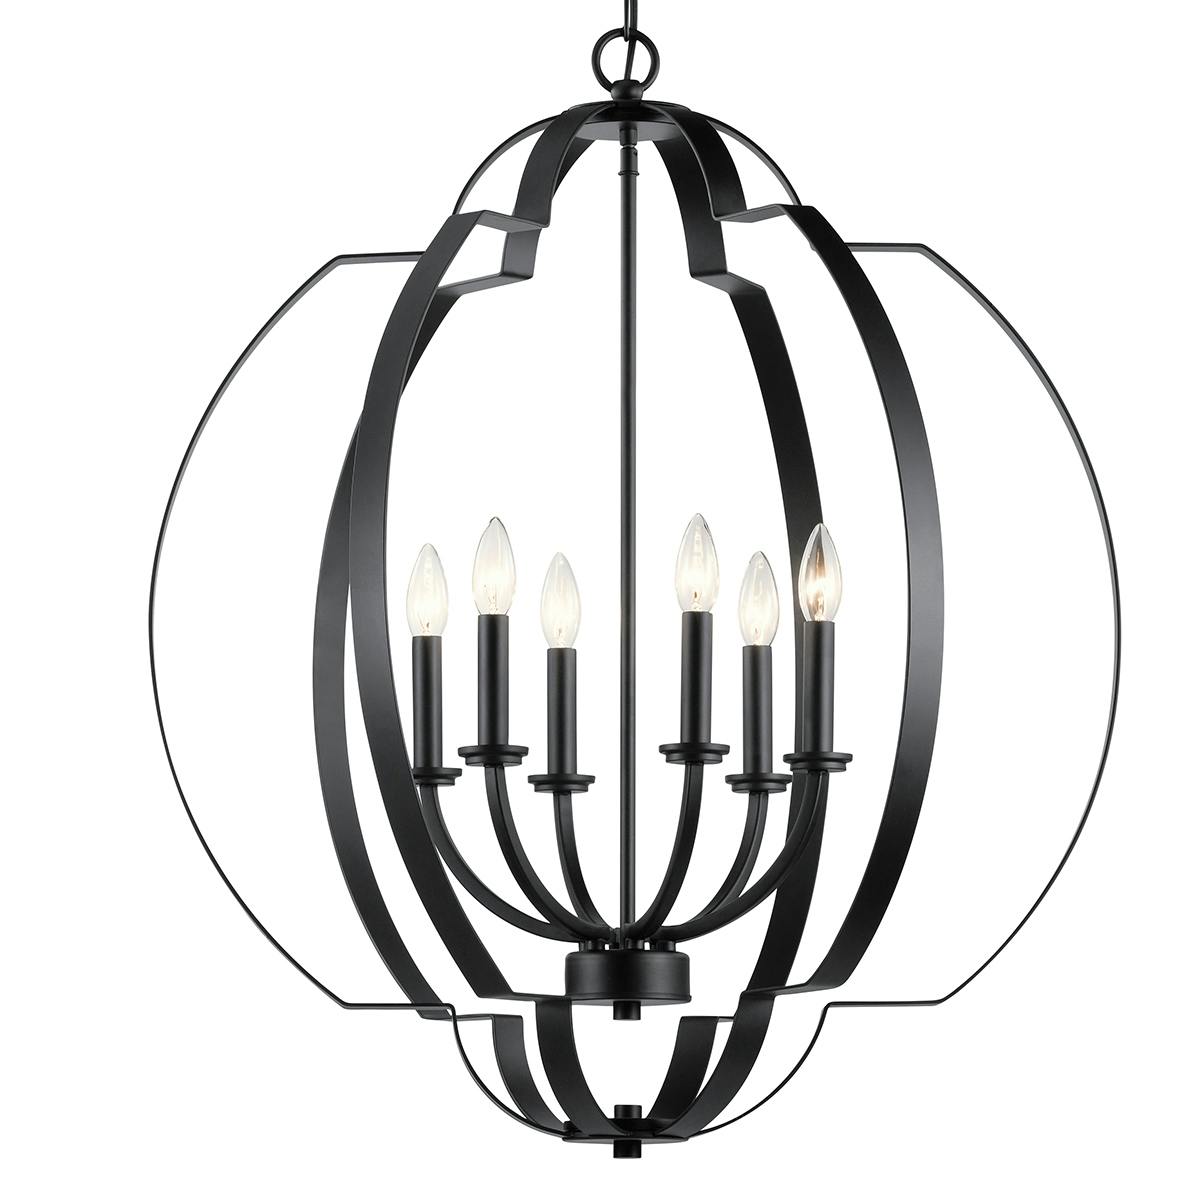 Close up view of the Voleta 27.75" 6 Light Chandelier Black on a white background